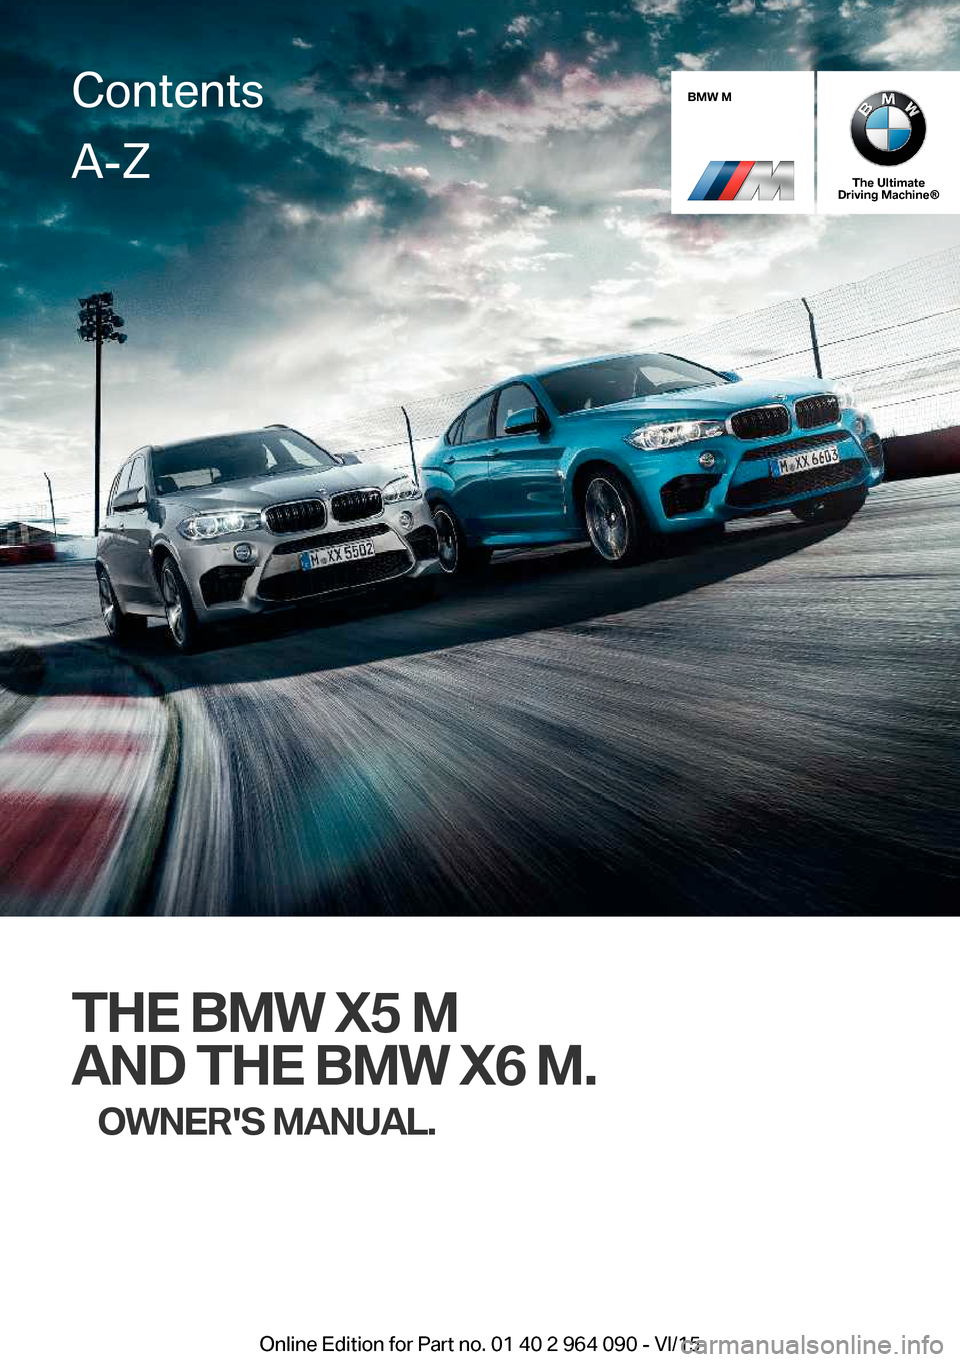 BMW X6M 2016 F86 Owners Manual BMW M
The Ultimate
Driving Machine®
THE BMW X5 M
AND THE BMW X6 M. OWNERS MANUAL.
ContentsA-Z
Online Edition for Part no. 01 40 2 964 090 - VI/15   